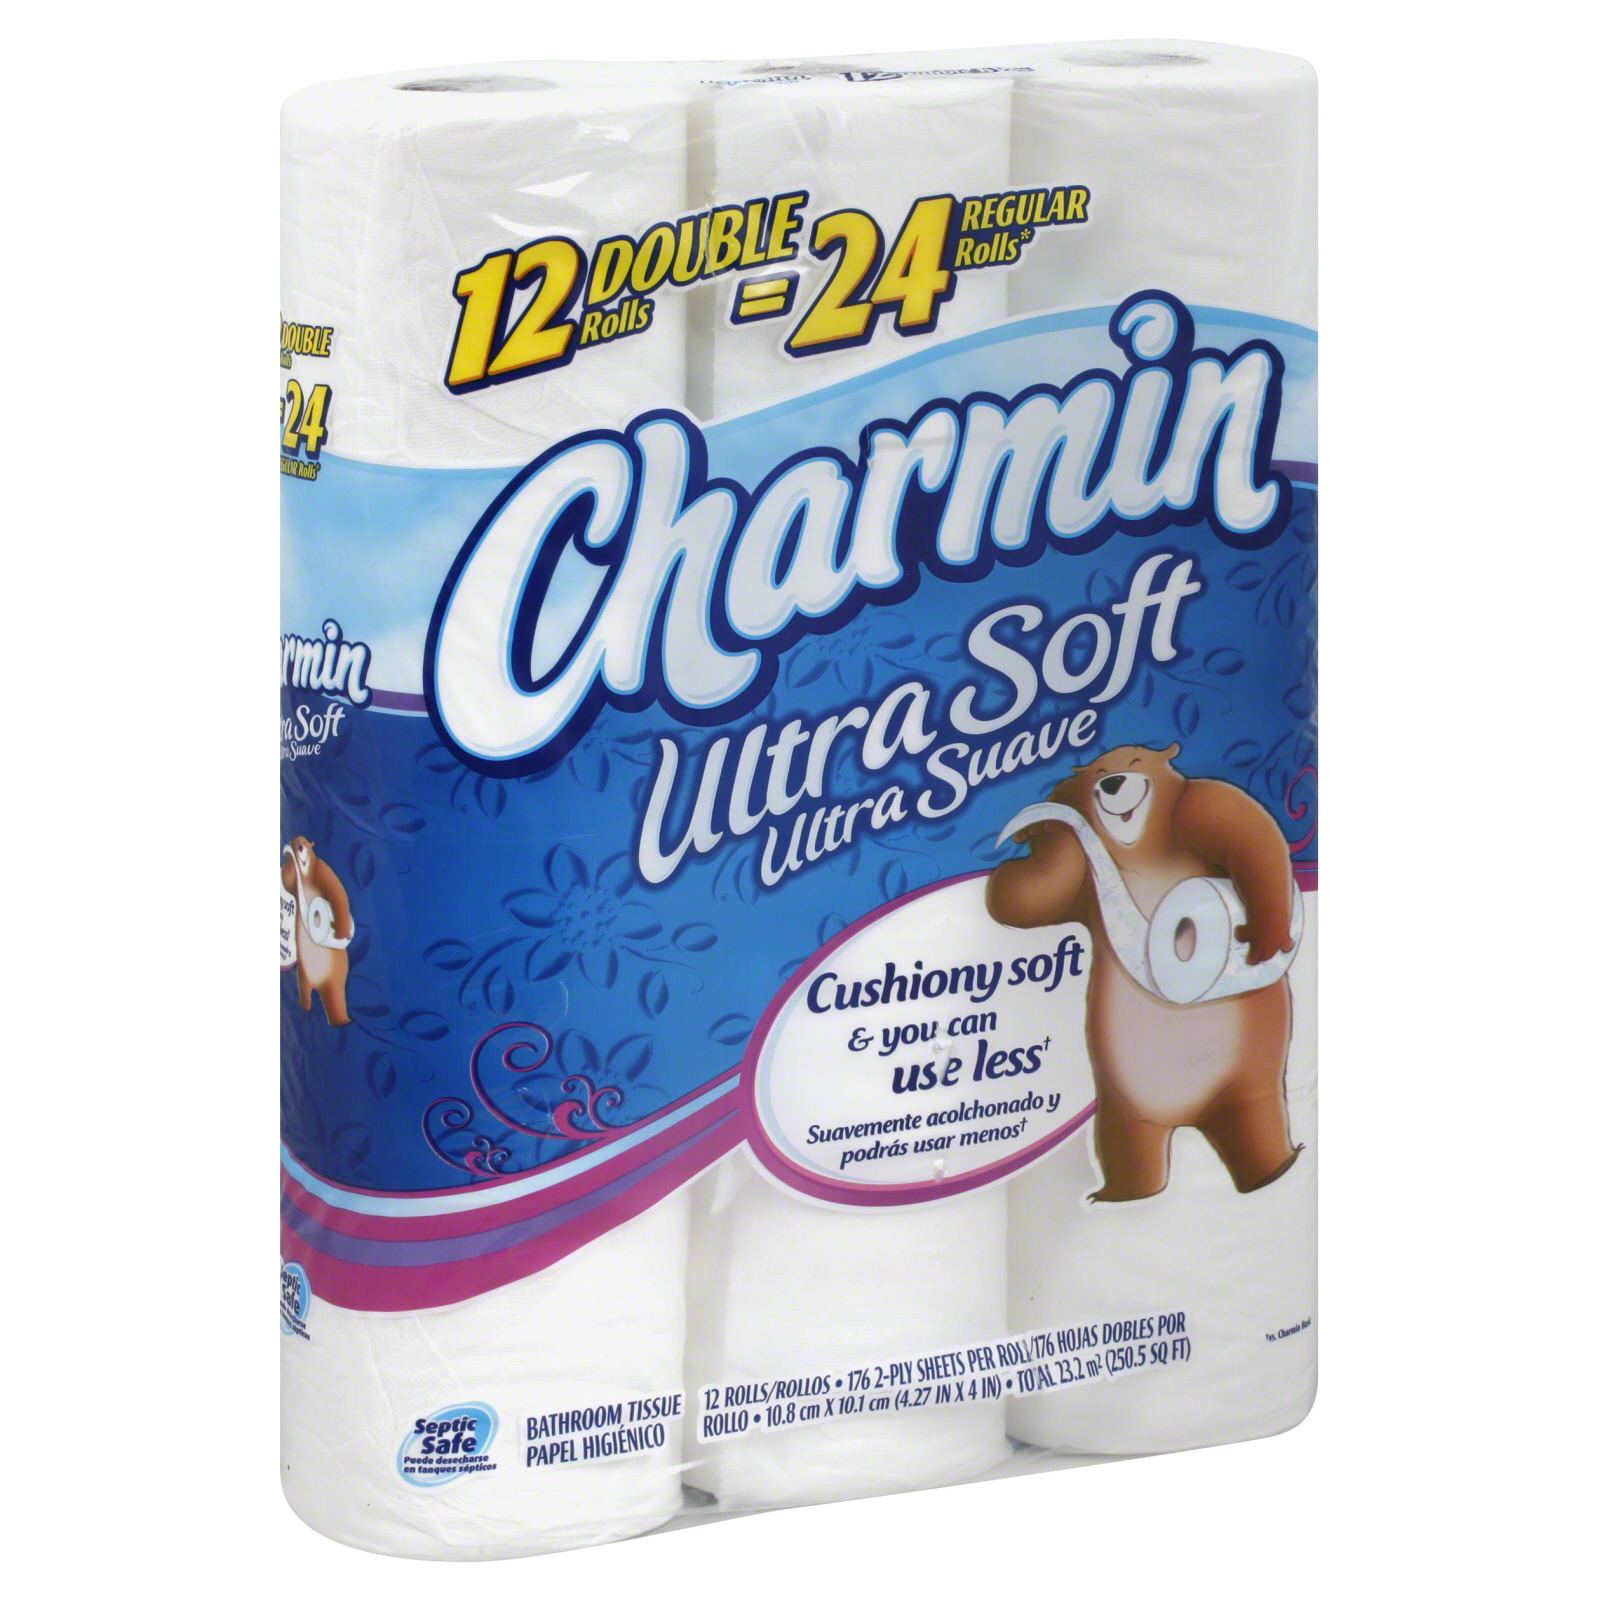 Charmin Ultra Soft Bathroom Tissue, Unscented, Double Rolls, 2-Ply, 12 rolls